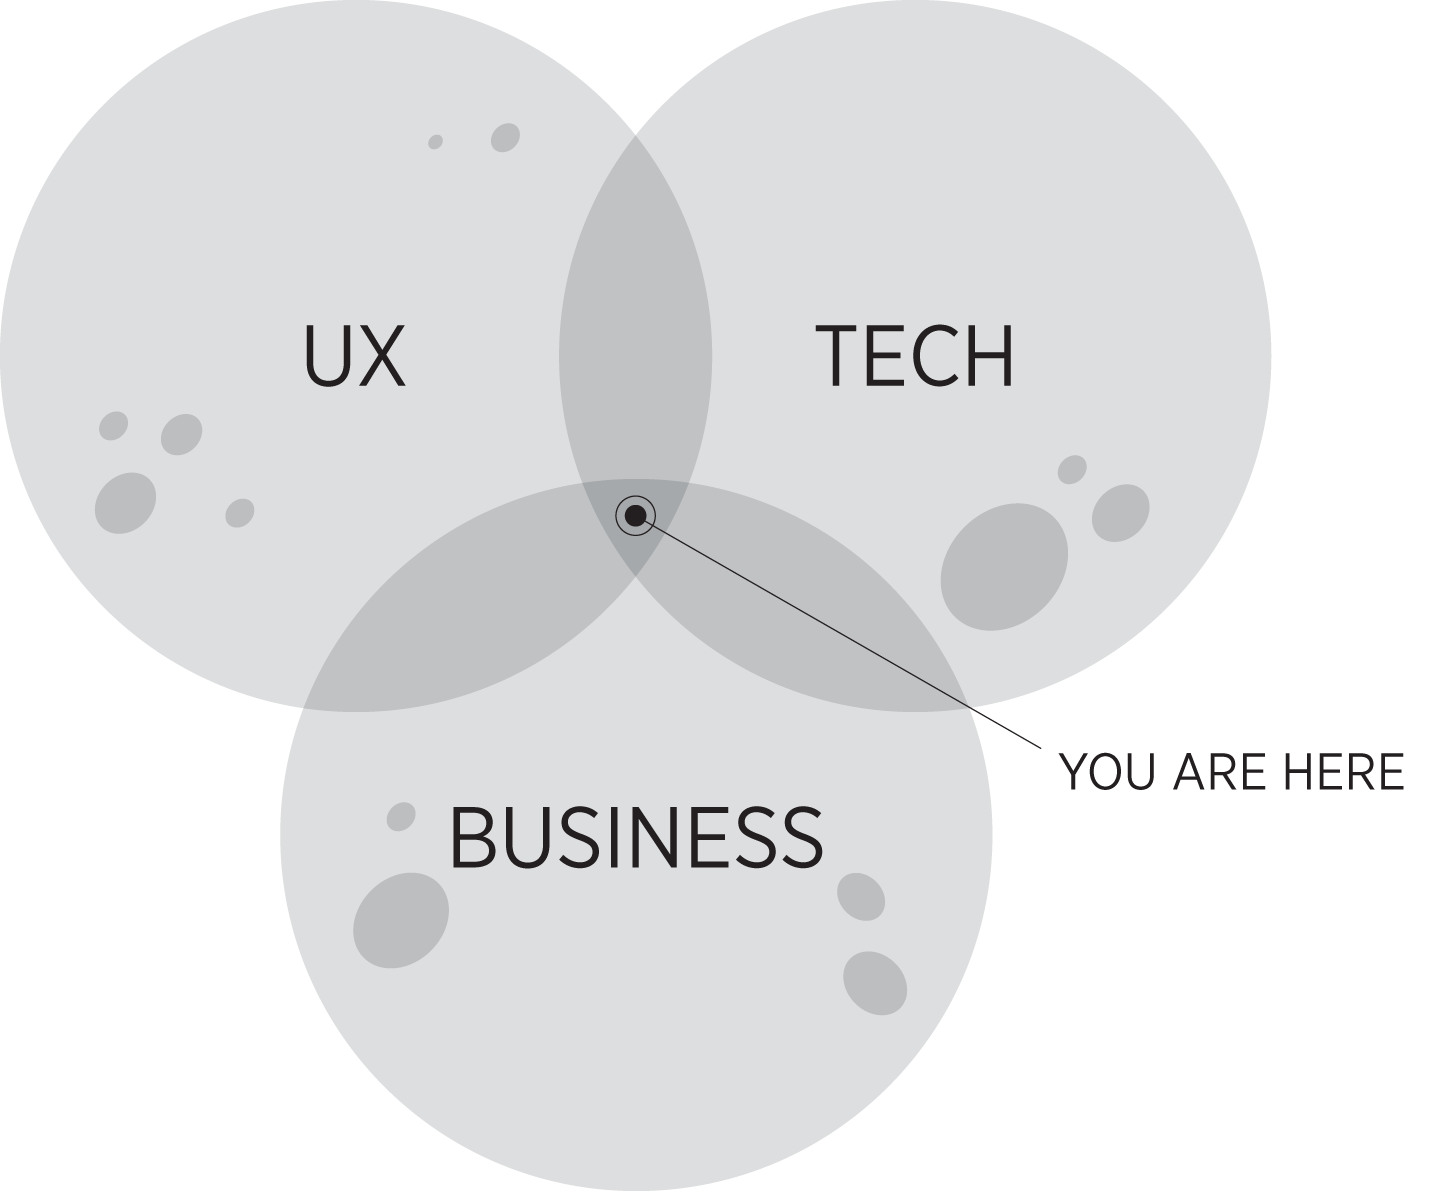 Product management has been called the intersection between business, technology, and user experience (source: Martin Eriksson, 2011).